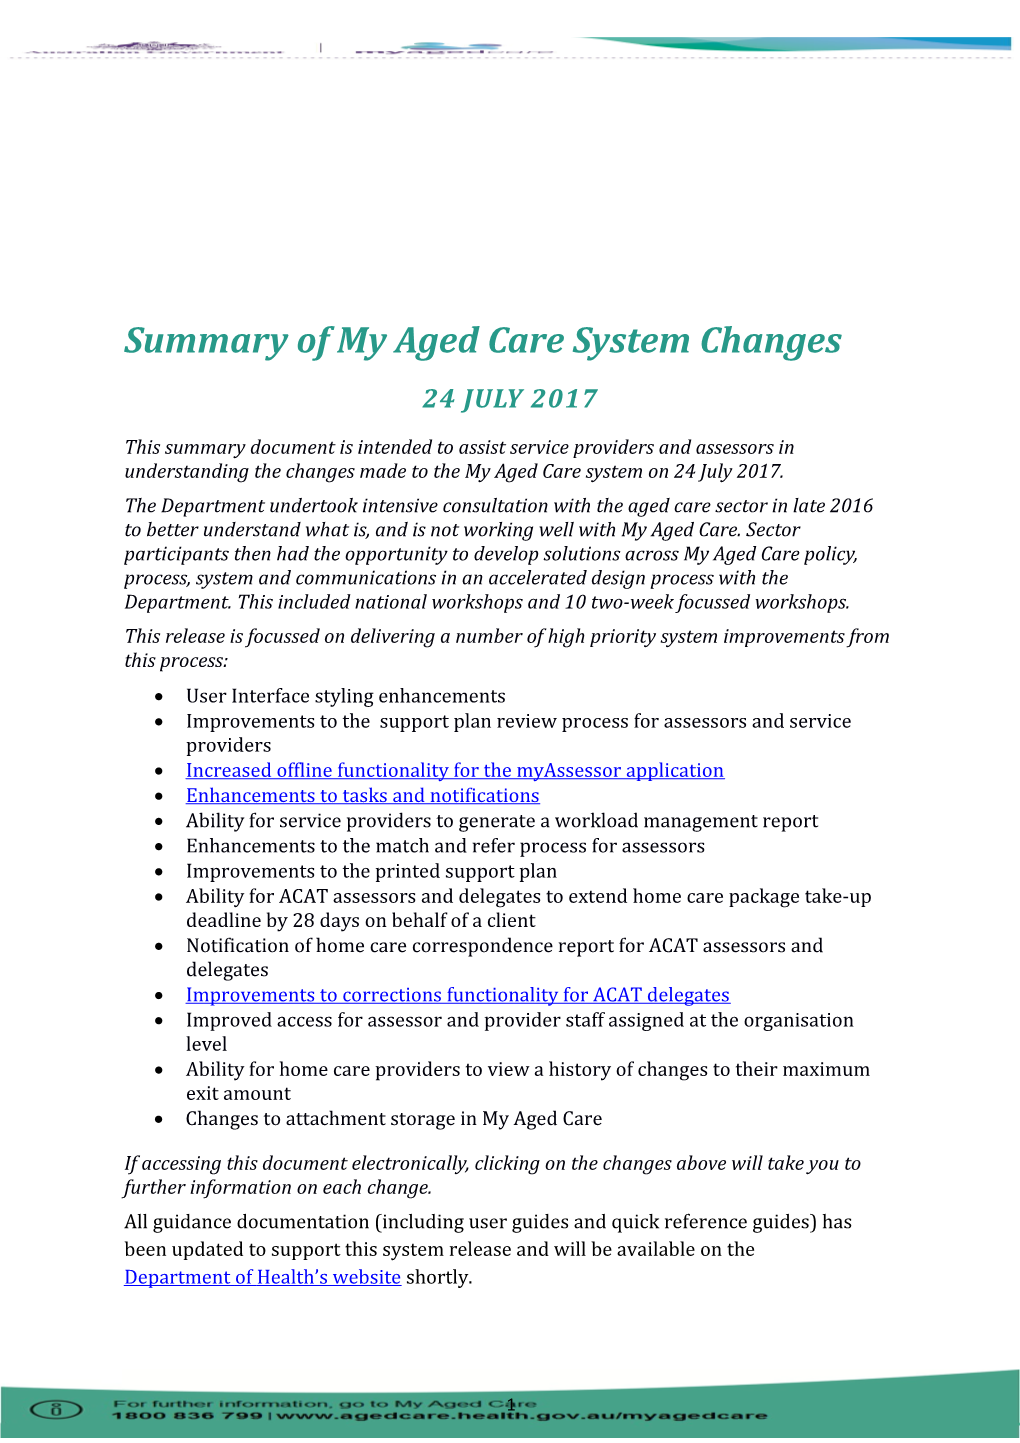 Summary of My Aged Care System Changes - July 2017